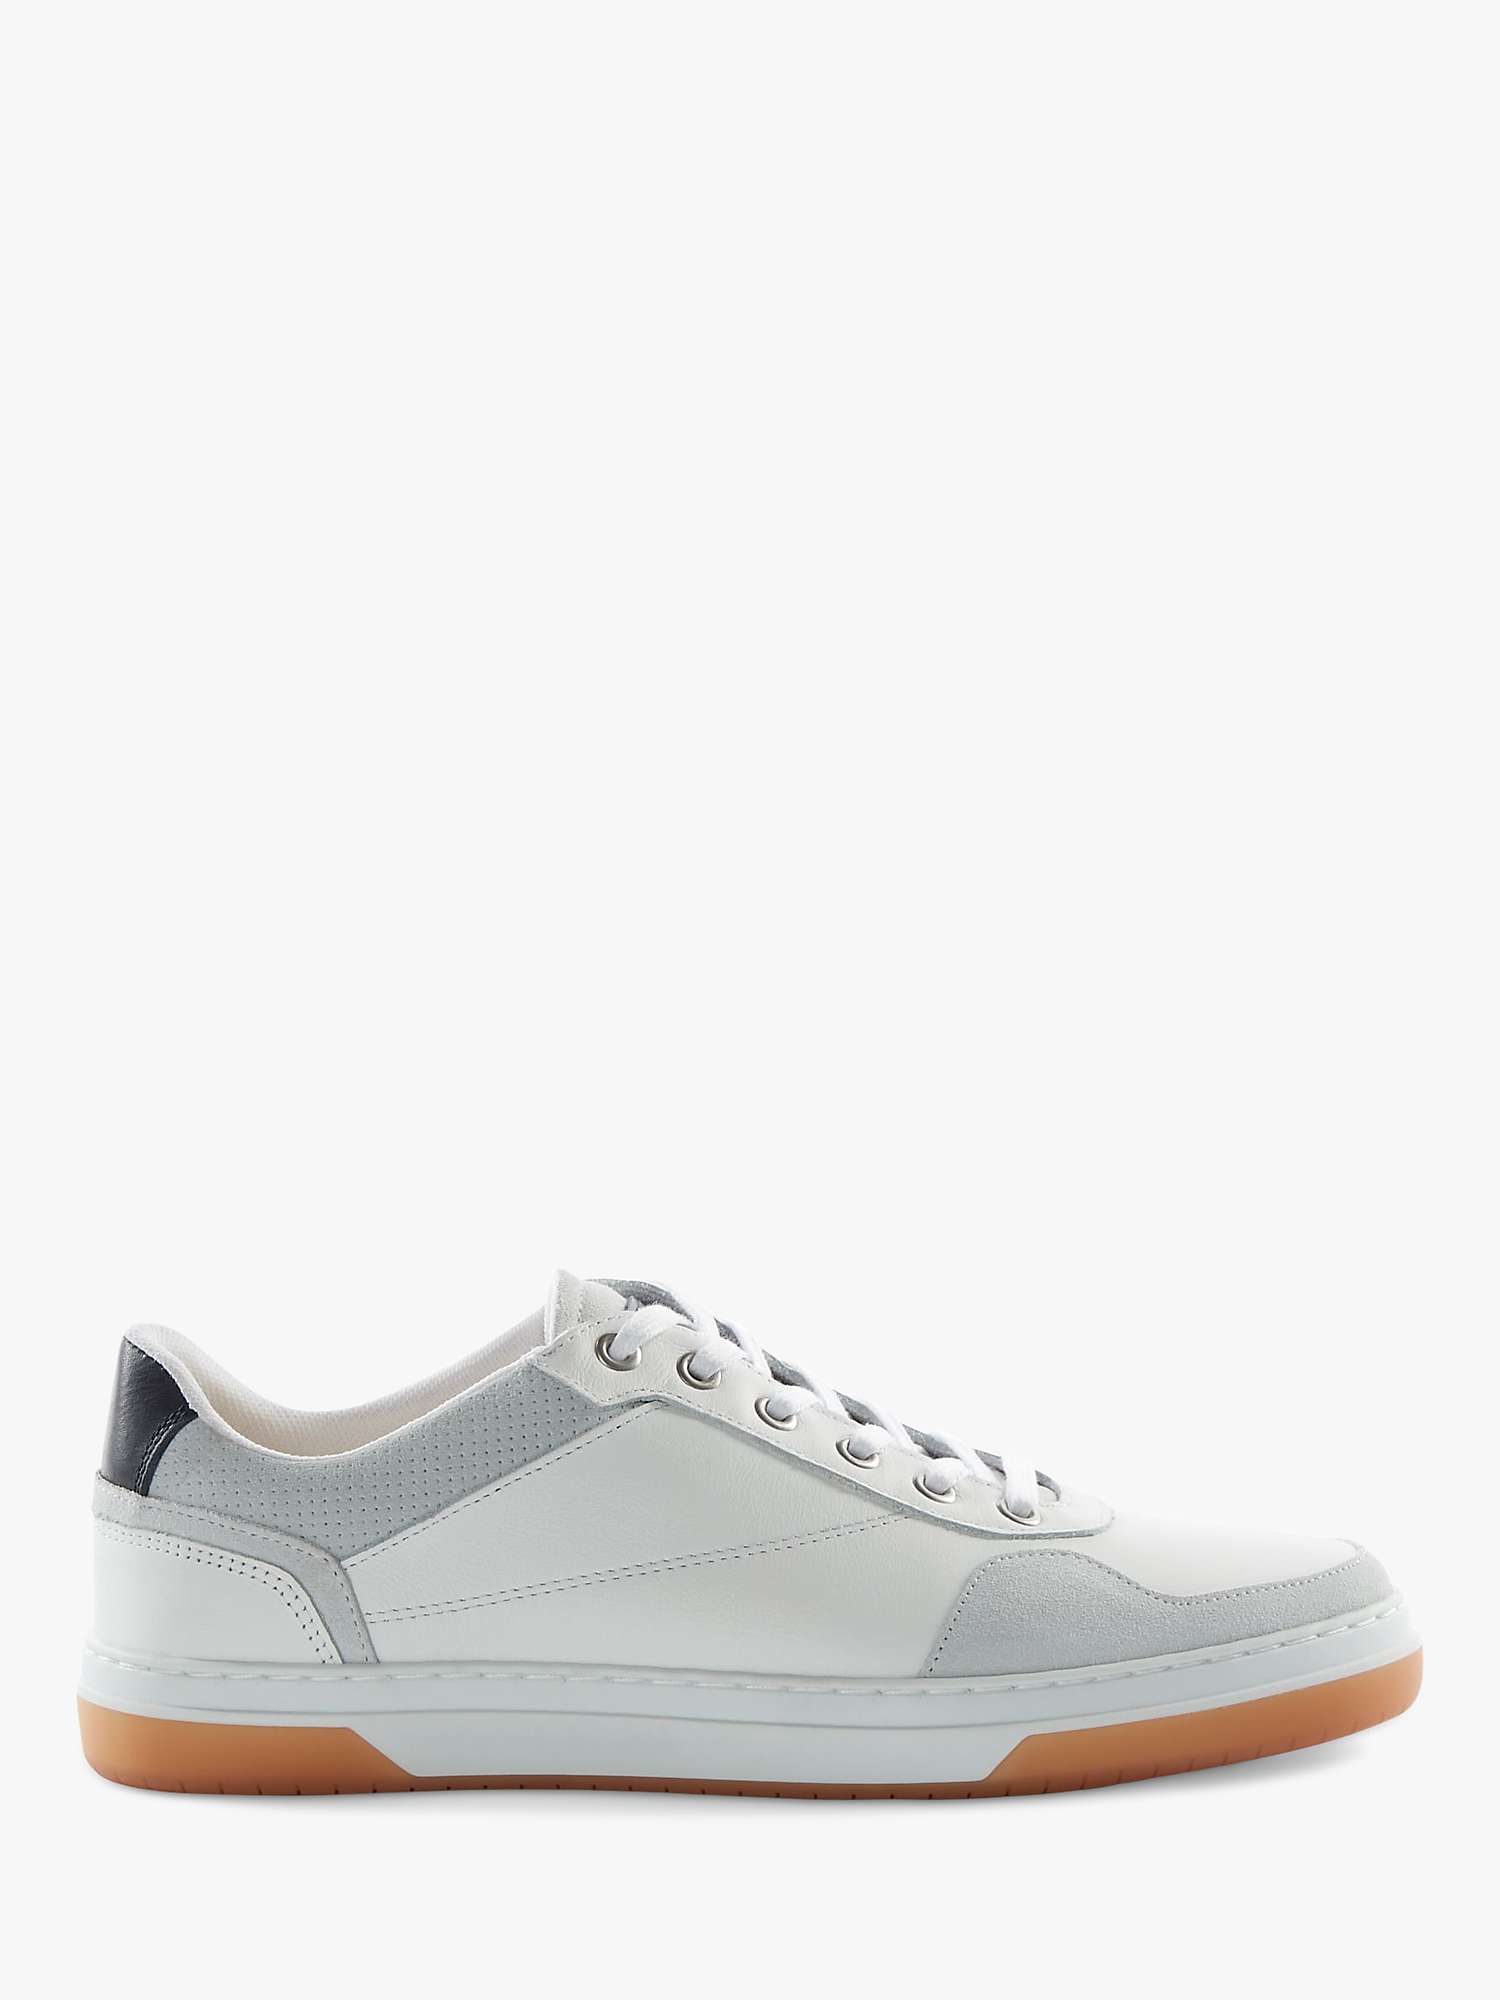 Buy Dune Thorin Leather Lace Up Trainers, White Online at johnlewis.com